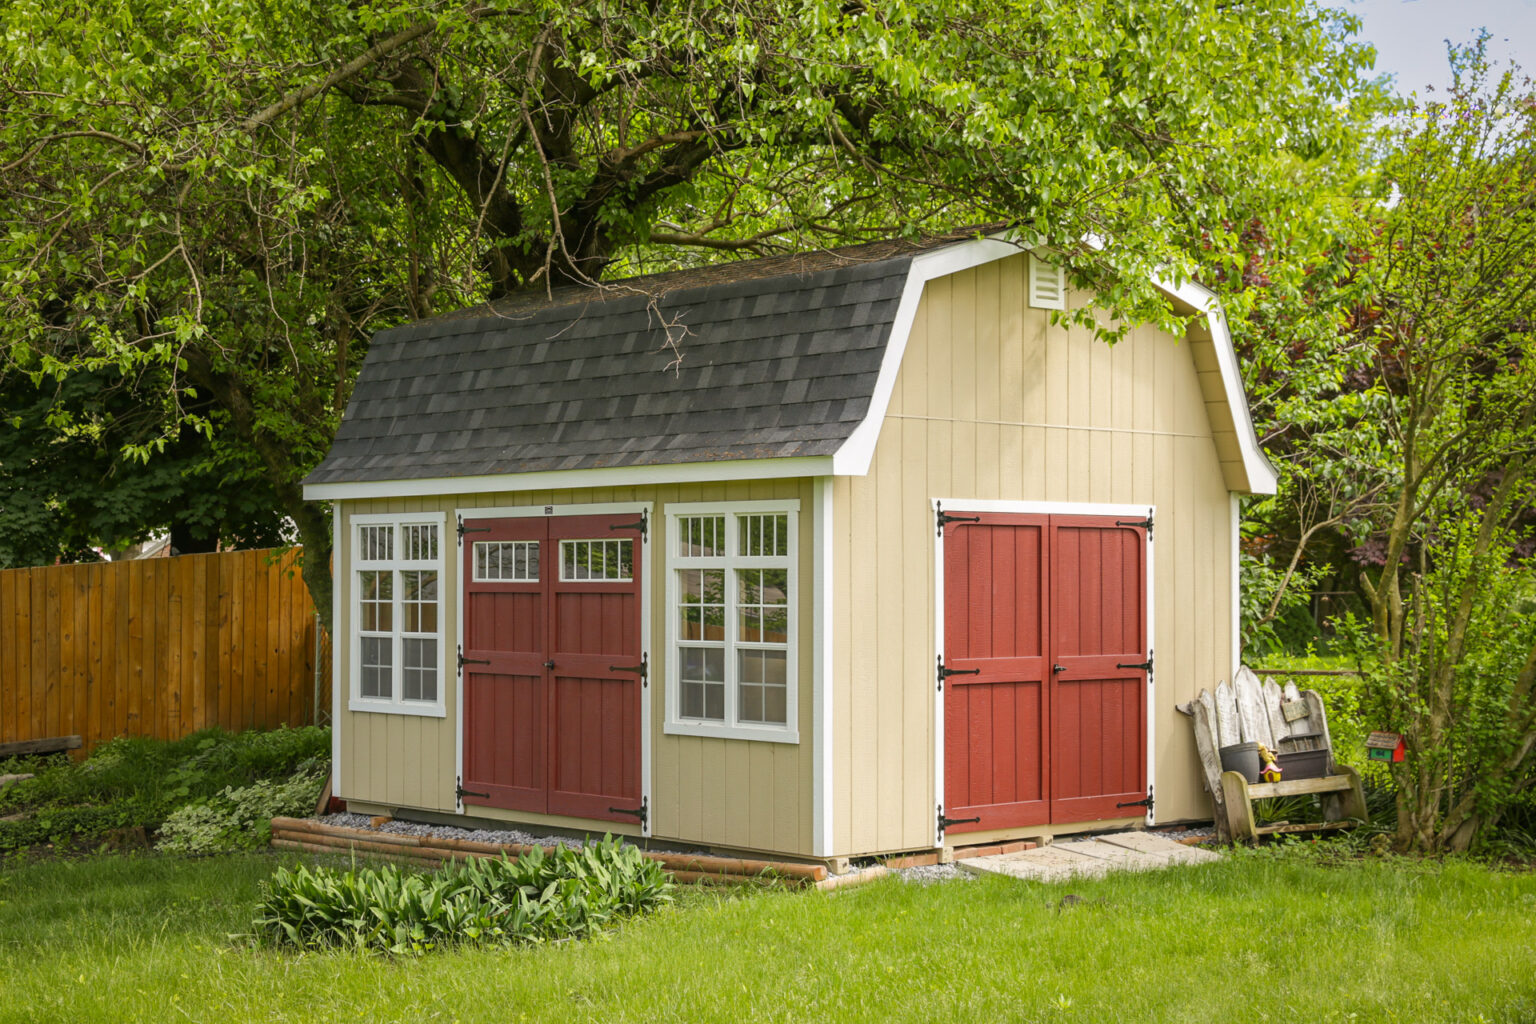 Shed For Sale In RI 2 1536x1024 